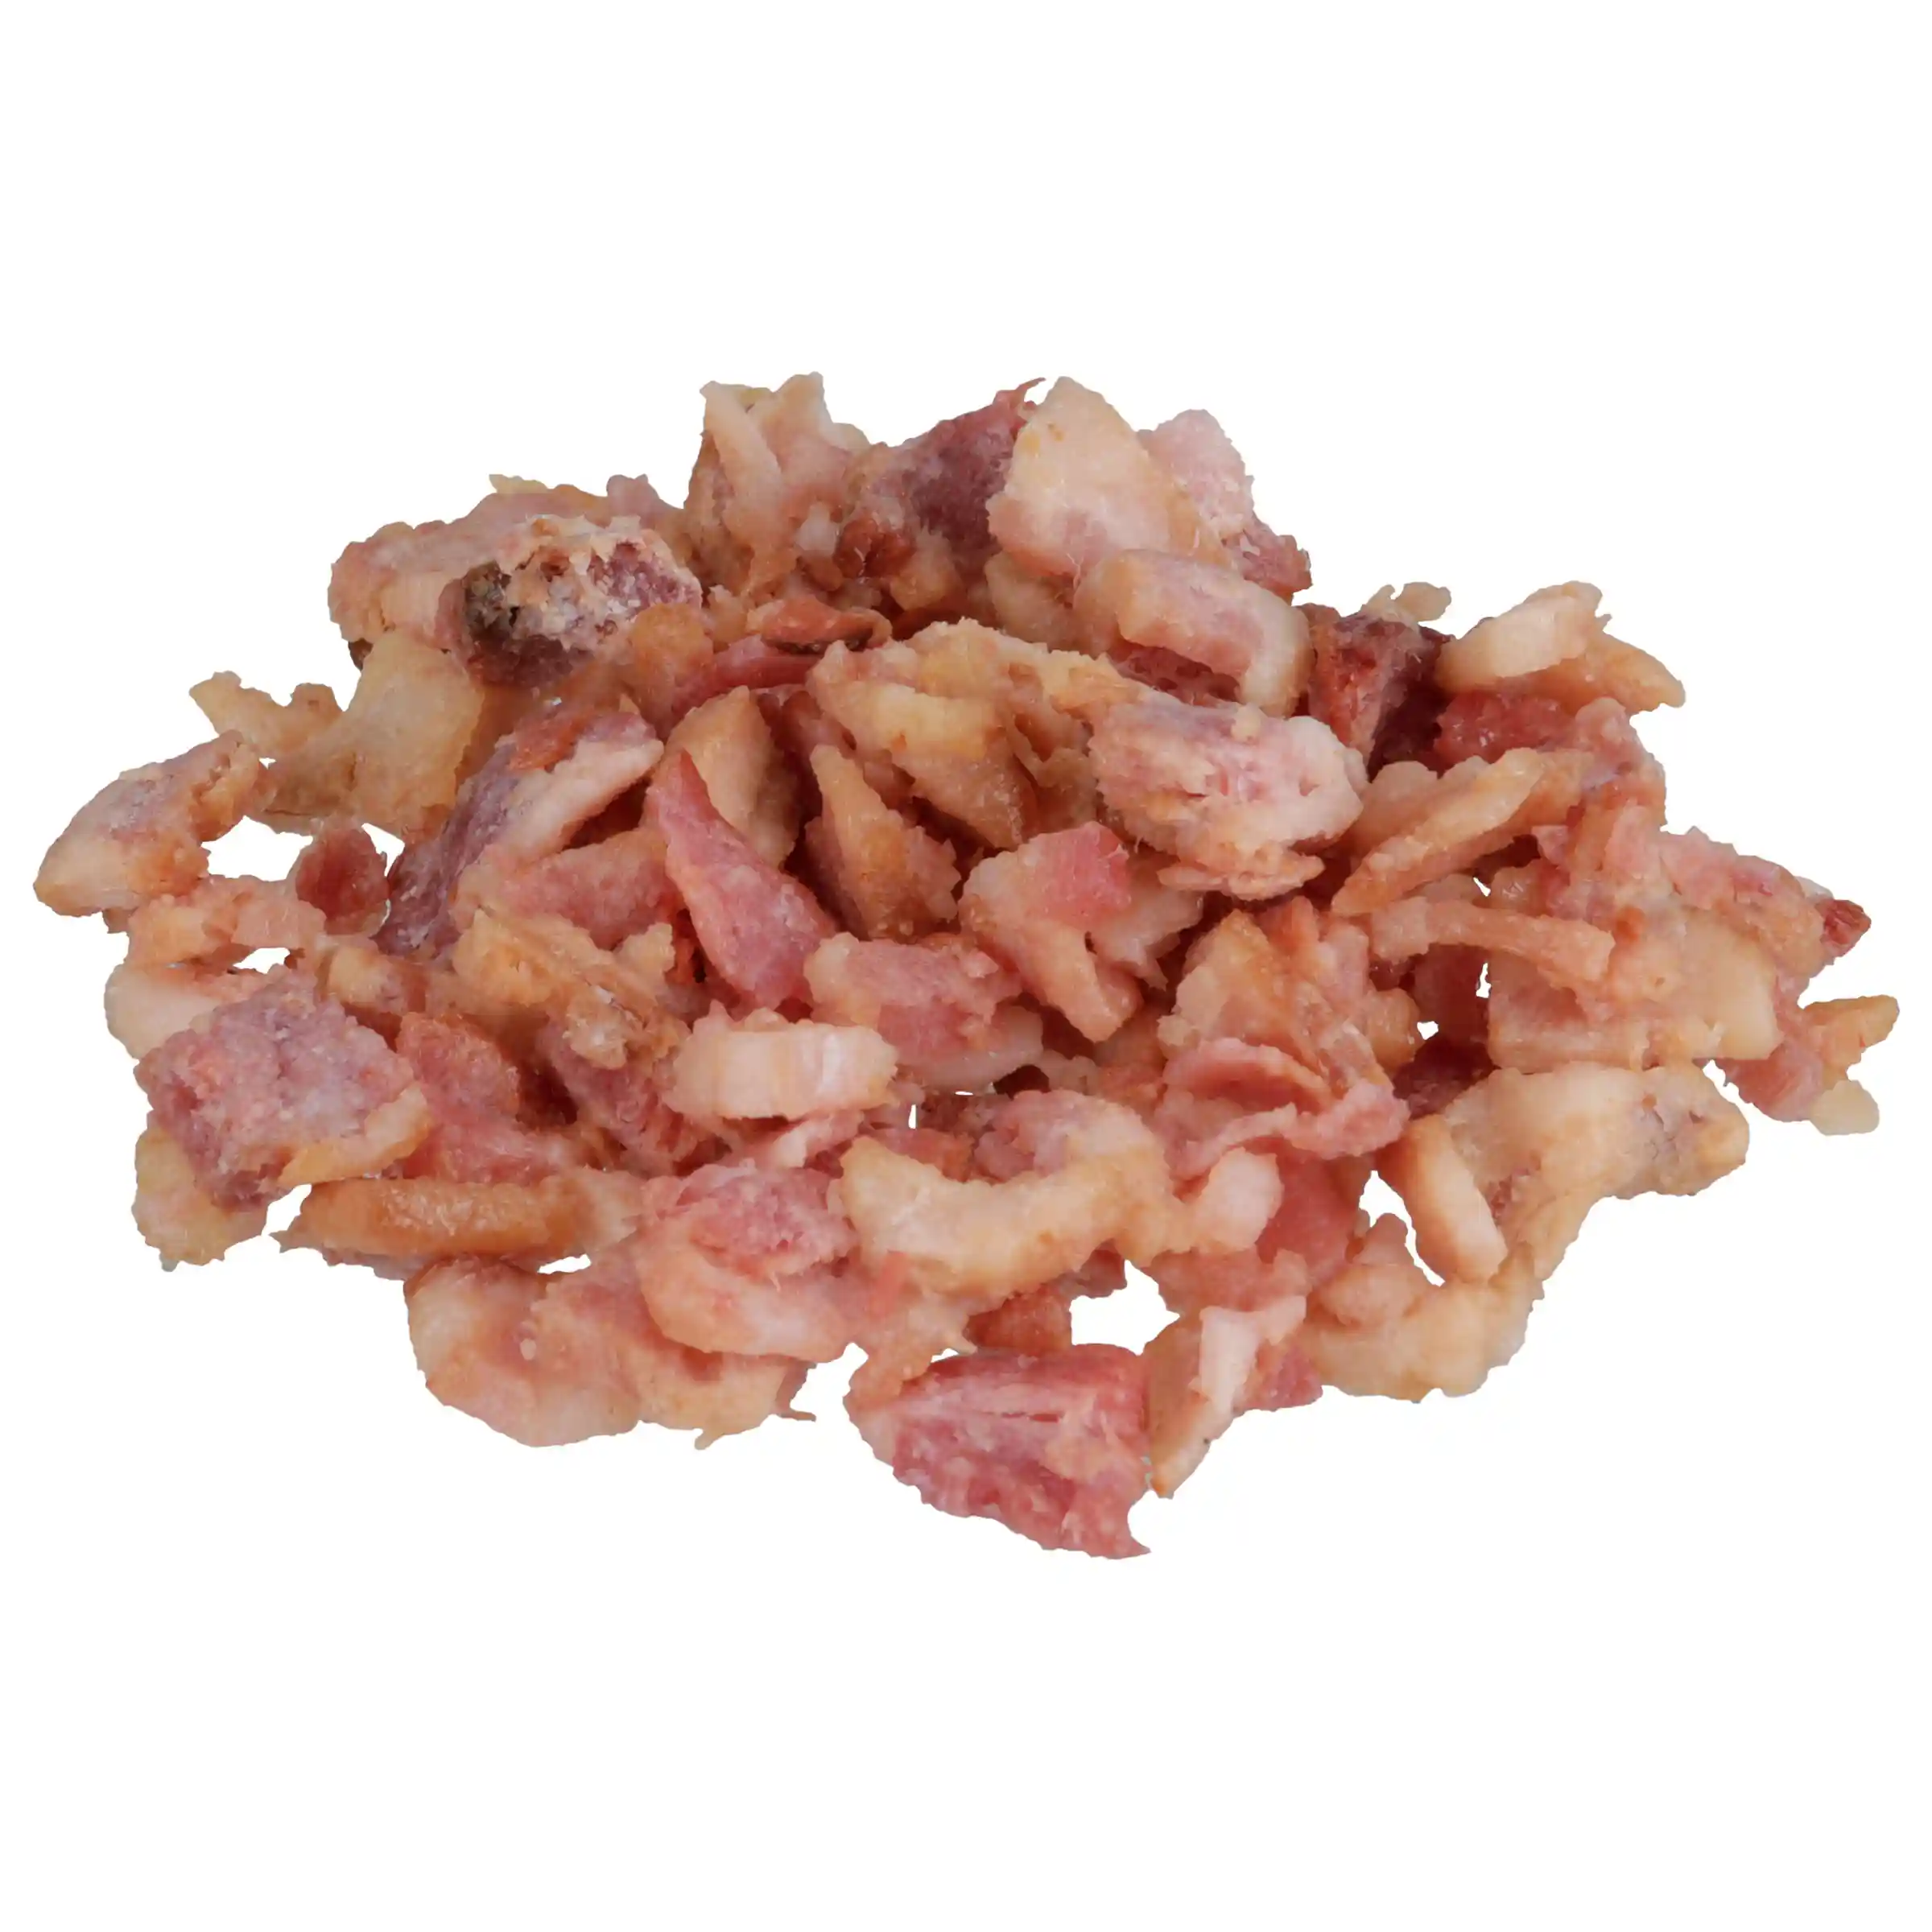 Jimmy Dean® Fully Cooked Hardwood Smoked Regular Cooked Bacon Pieceshttps://images.salsify.com/image/upload/s--cI_SX-2Z--/q_25/abcnvaqsikgjvsb4fh4r.webp